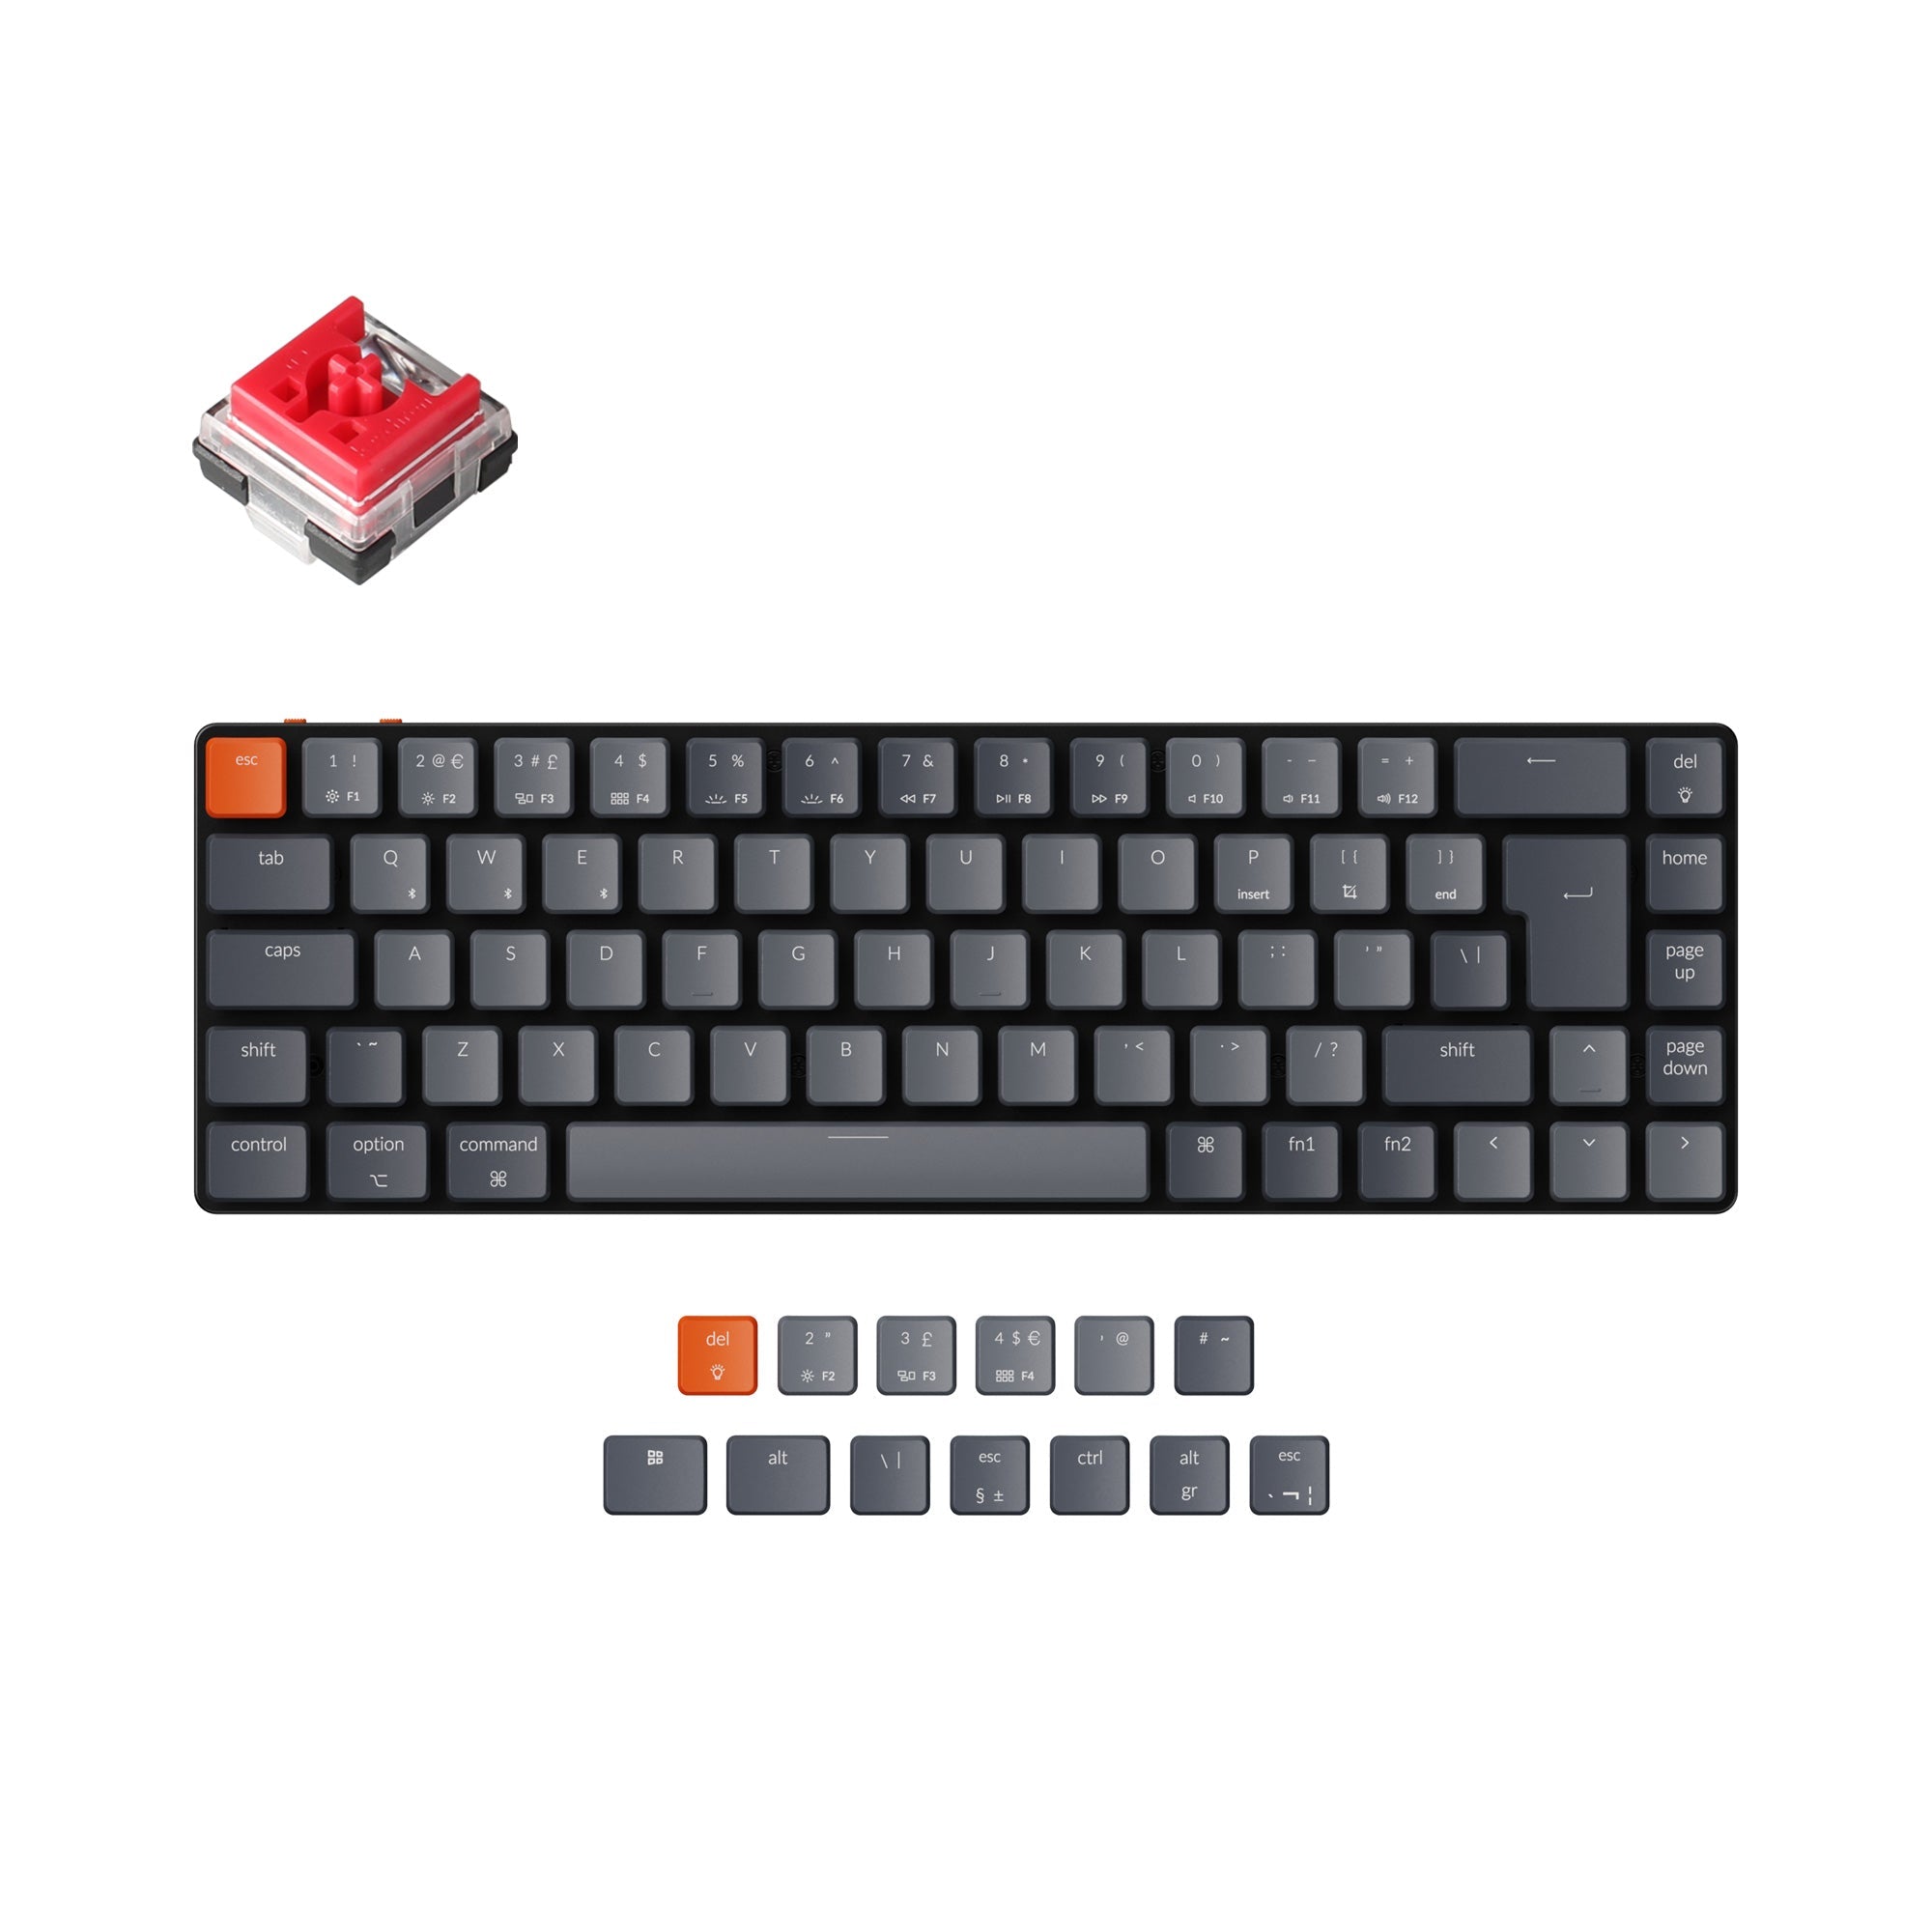 Keychron K7 ultra slim compact wireless mechanical keyboard for Mac Windows low profile Optical red switch white backlight UK ISO layout